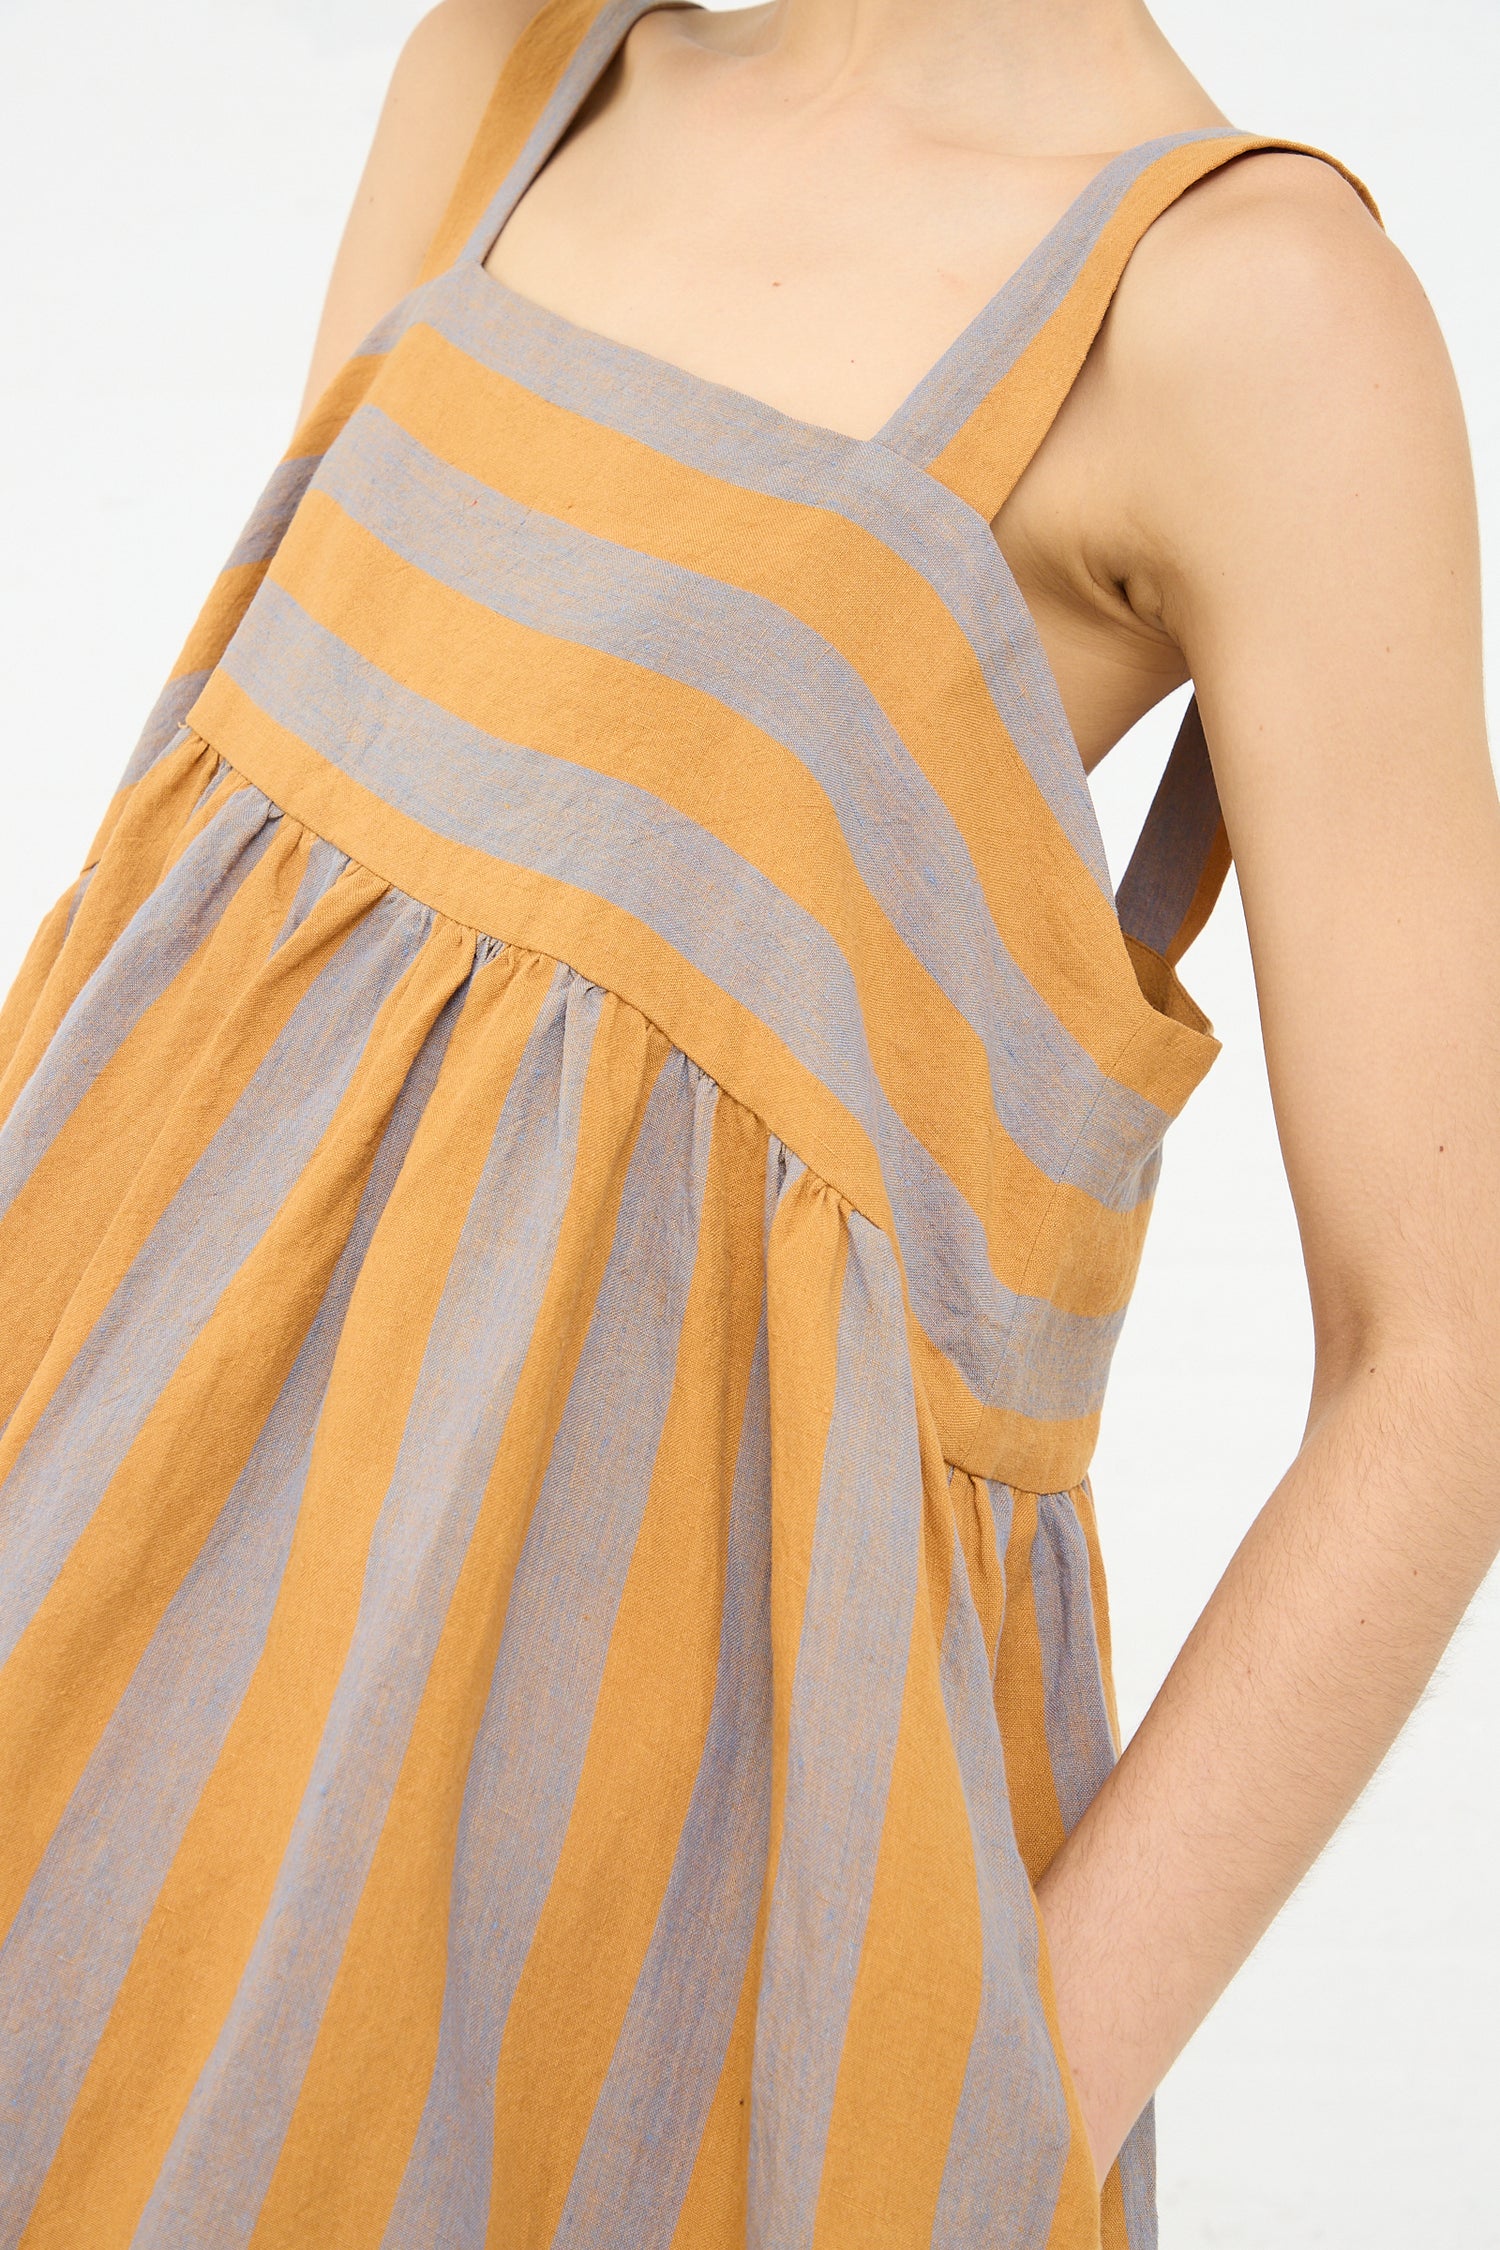 A close-up view of a person wearing a Cawley Irish Linen Elba Dress in Bronze with orange and blue hues, focusing on the upper part of the dress and shoulder area.